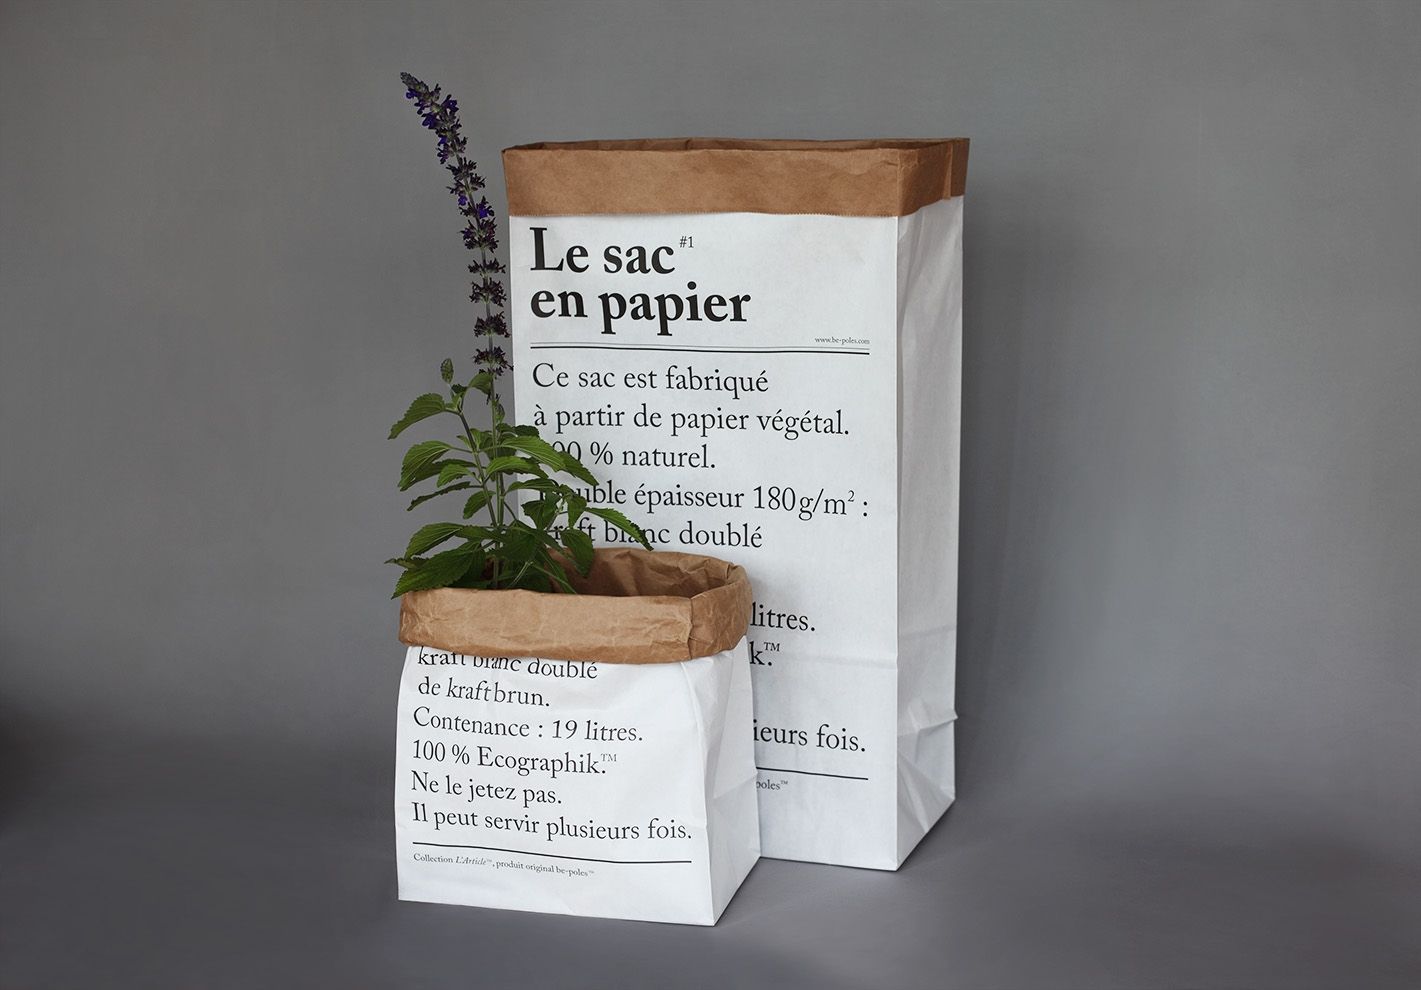 The Small Paper Bag - be-poles